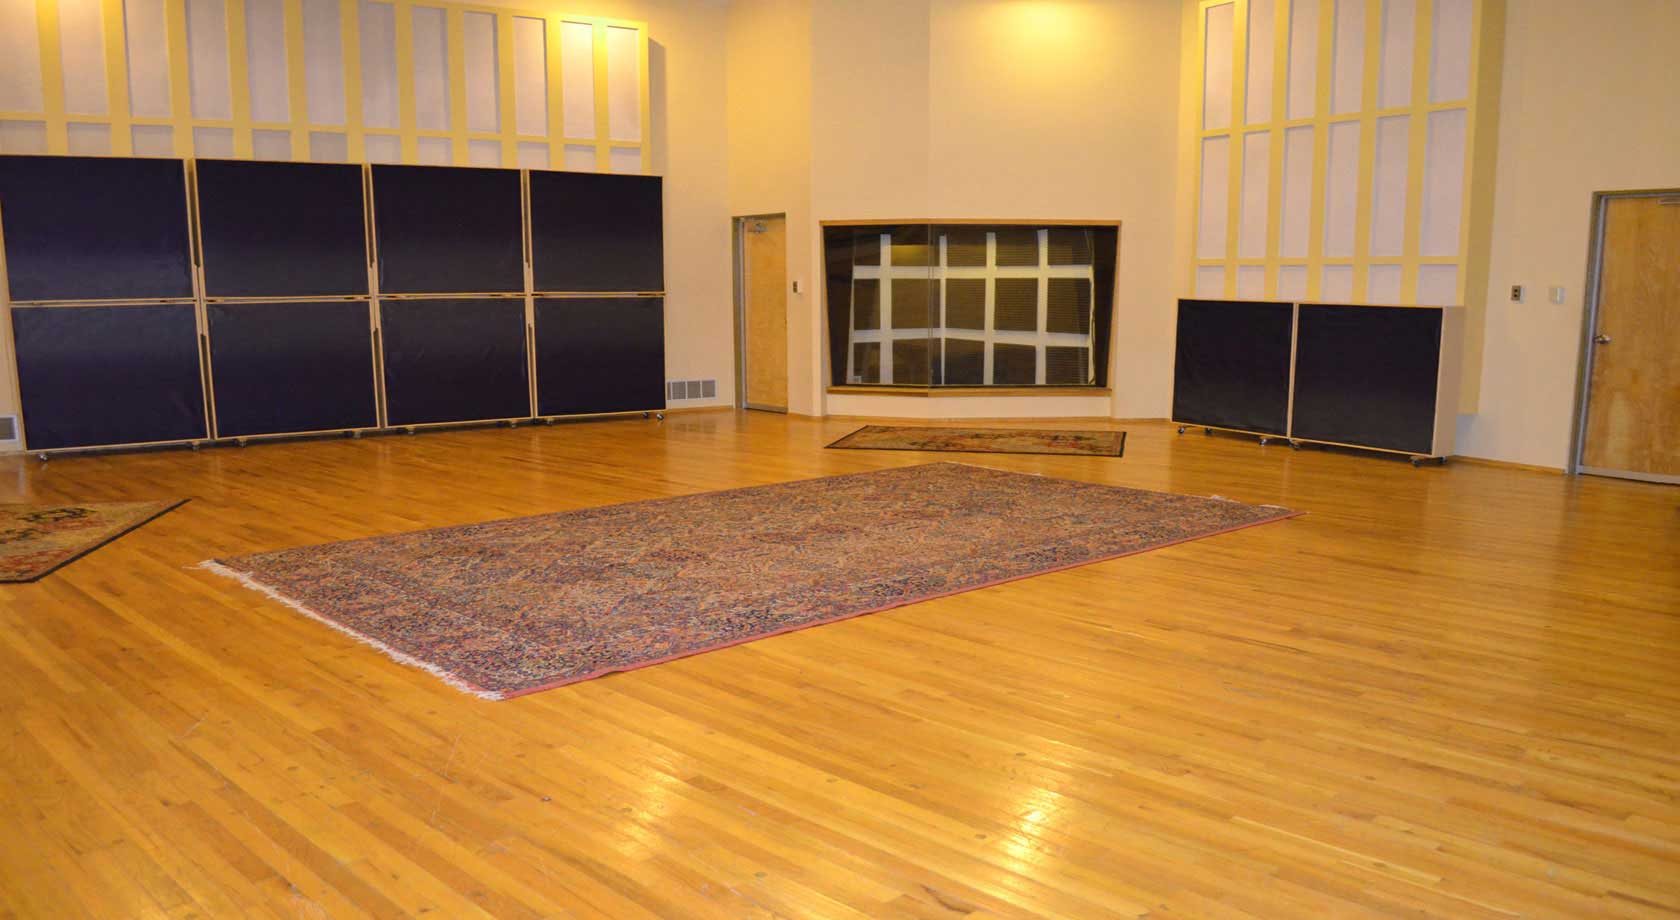 Tracking Room 1